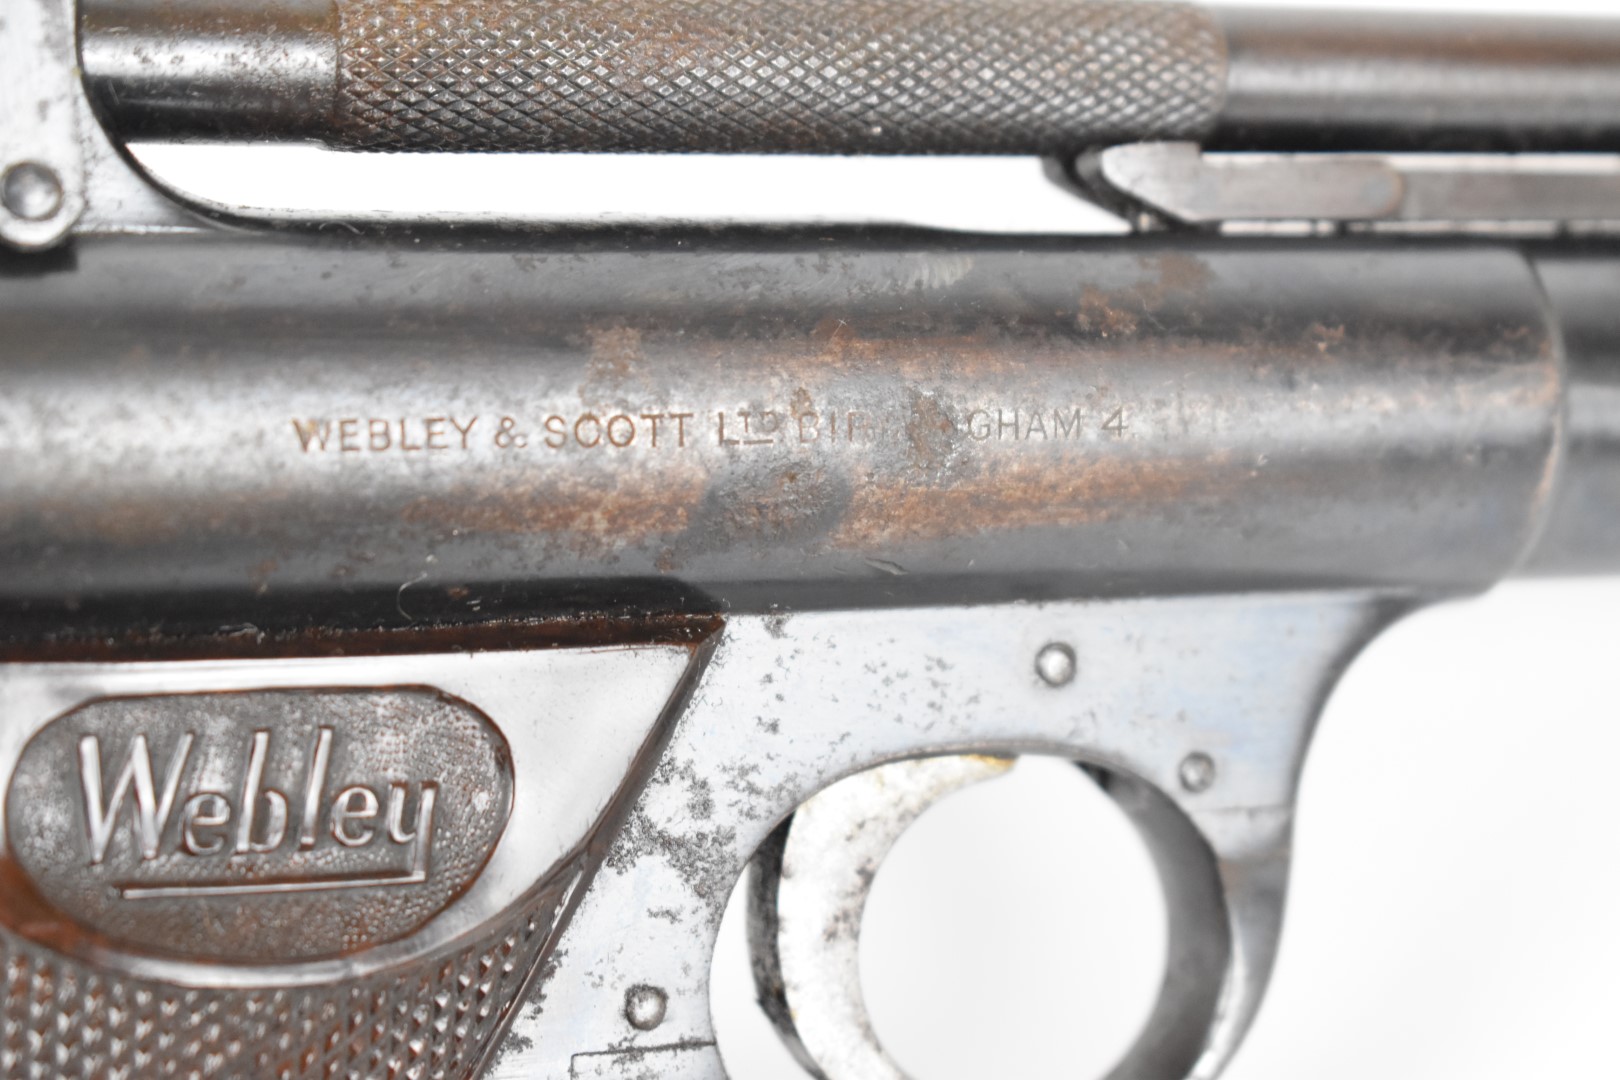 Webley Senior .177 air pistol with named and chequered Bakelite grips and adjustable sights, - Image 9 of 12